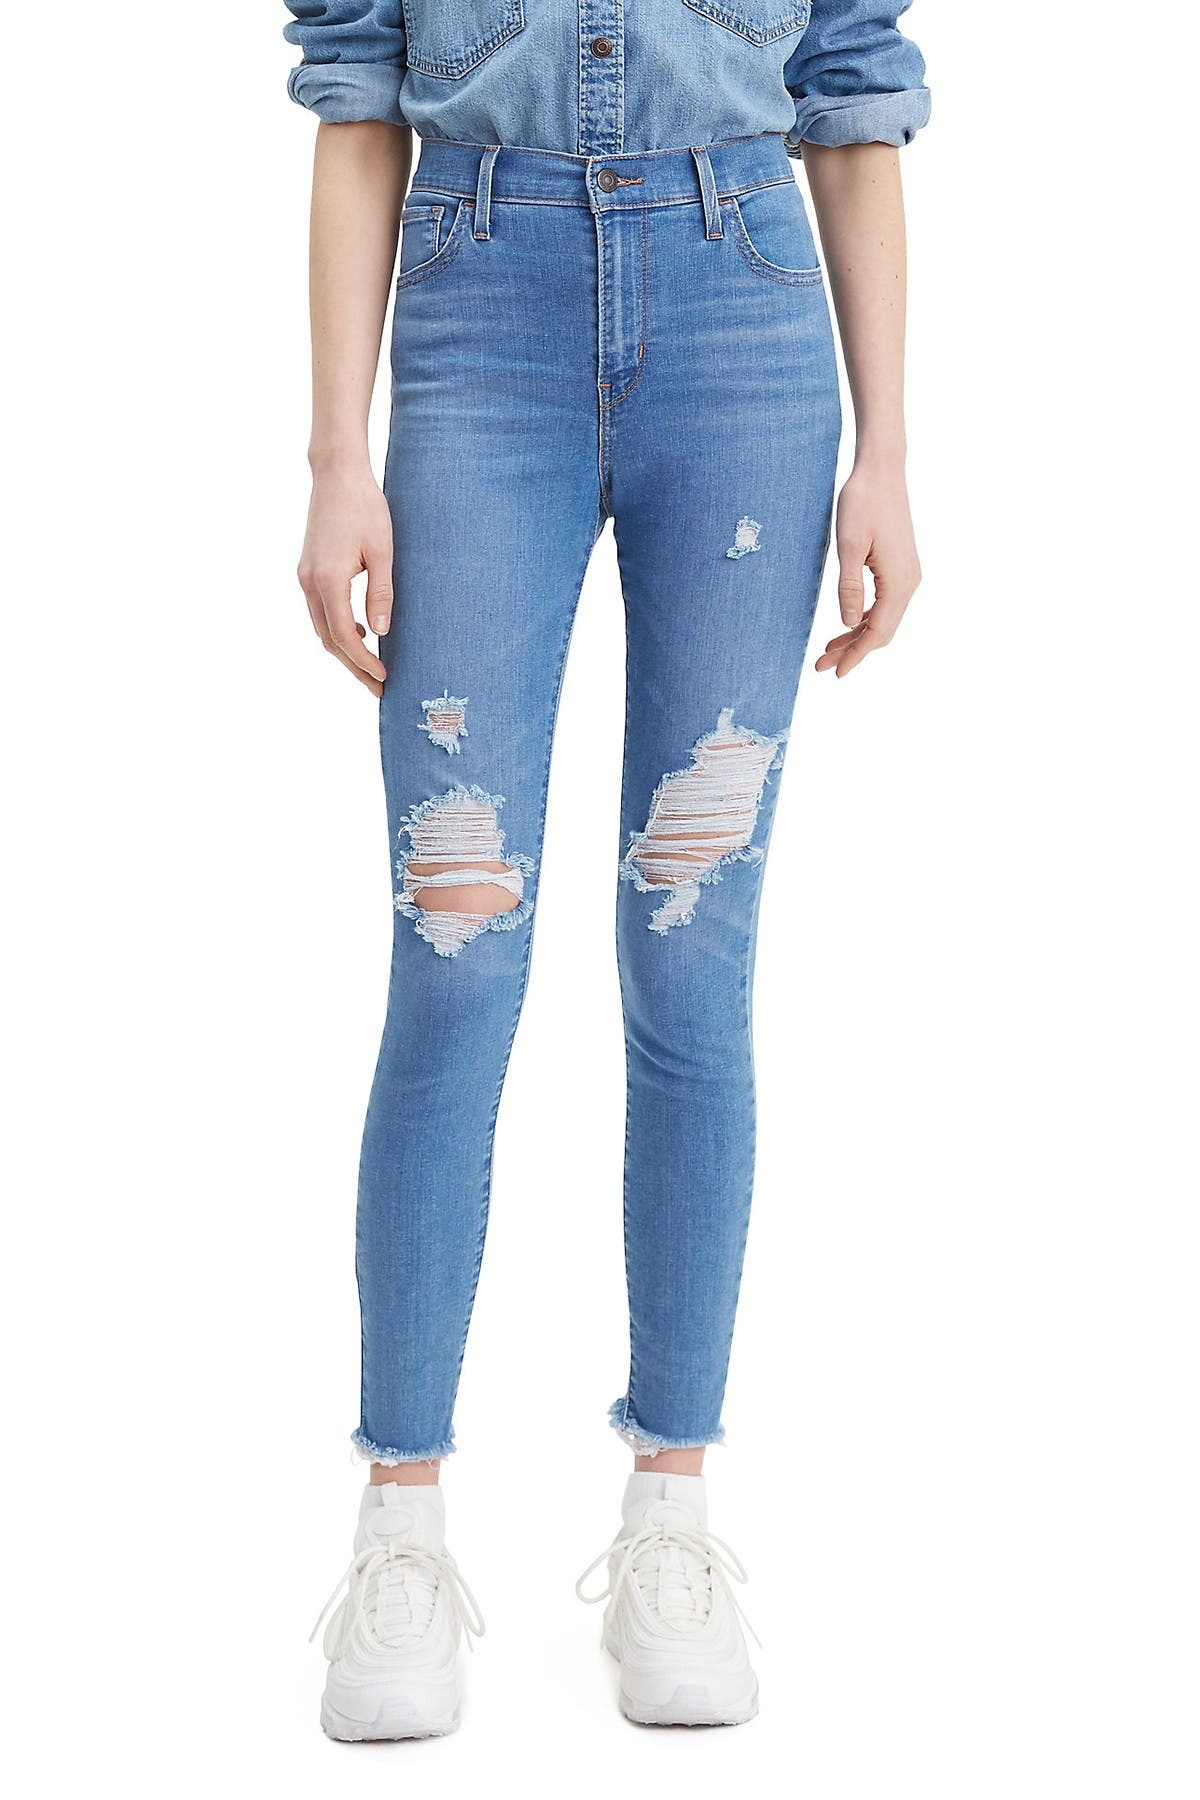 levis 720 high rise super skinny jeans